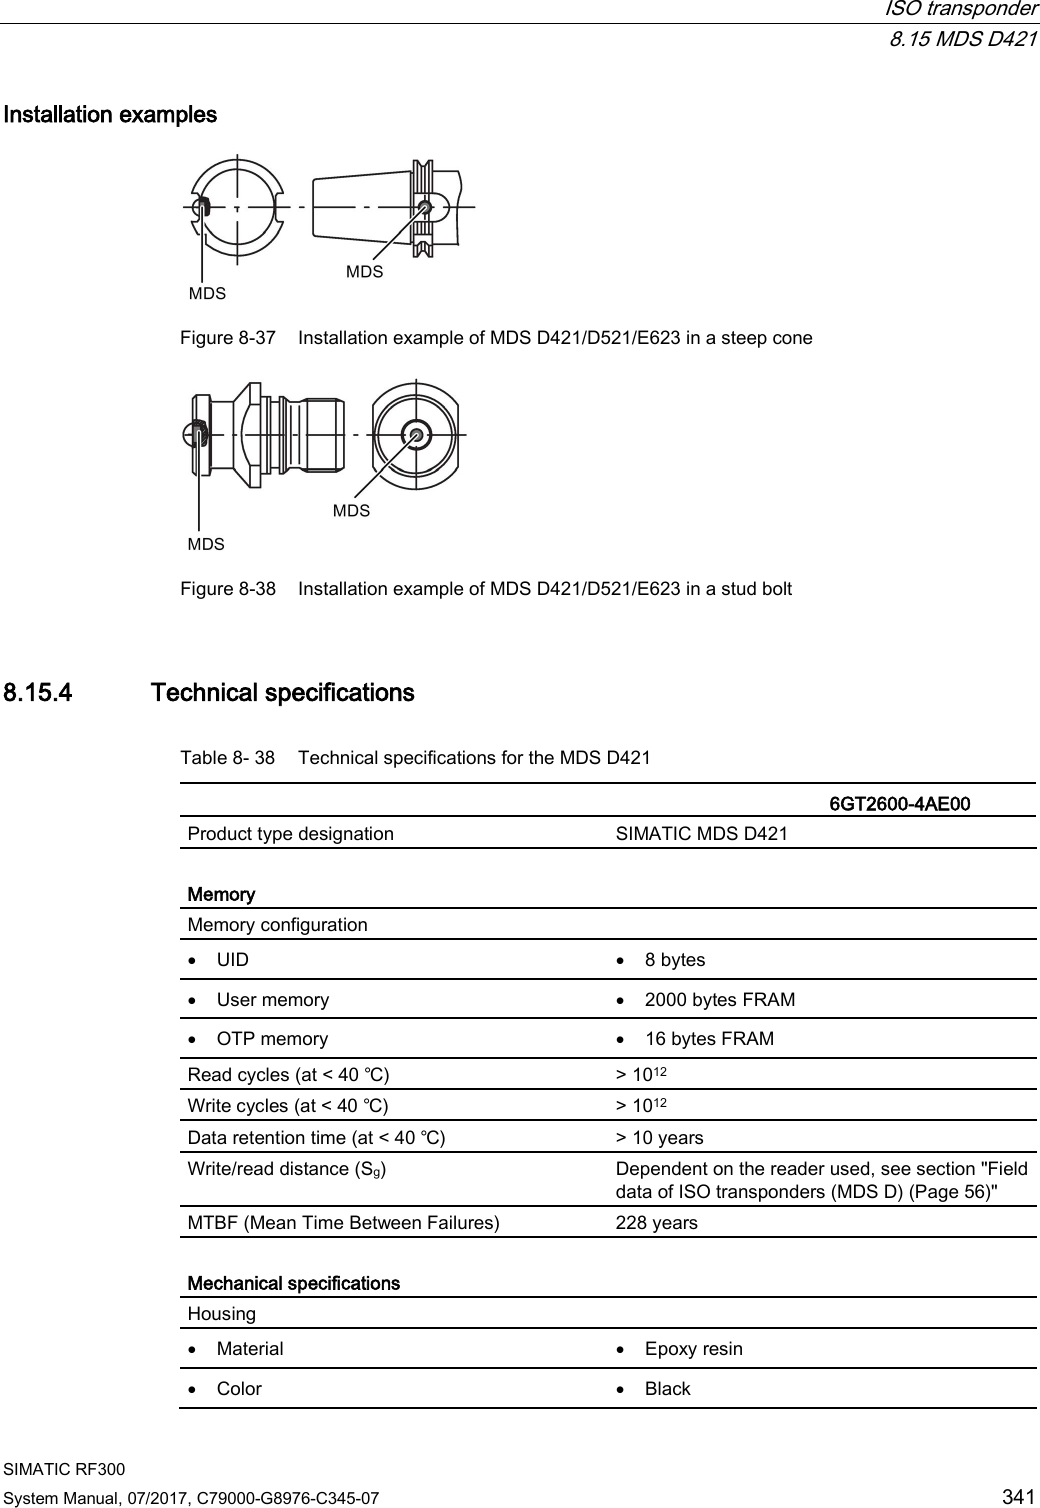  ISO transponder  8.15 MDS D421 SIMATIC RF300 System Manual, 07/2017, C79000-G8976-C345-07 341 Installation examples  Figure 8-37 Installation example of MDS D421/D521/E623 in a steep cone  Figure 8-38 Installation example of MDS D421/D521/E623 in a stud bolt 8.15.4 Technical specifications Table 8- 38 Technical specifications for the MDS D421    6GT2600-4AE00  Product type designation SIMATIC MDS D421  Memory Memory configuration  • UID • 8 bytes • User memory • 2000 bytes FRAM • OTP memory • 16 bytes FRAM Read cycles (at &lt; 40 ℃) &gt; 1012 Write cycles (at &lt; 40 ℃) &gt; 1012 Data retention time (at &lt; 40 ℃) &gt; 10 years Write/read distance (Sg)  Dependent on the reader used, see section &quot;Field data of ISO transponders (MDS D) (Page 56)&quot; MTBF (Mean Time Between Failures) 228 years  Mechanical specifications Housing  • Material • Epoxy resin • Color • Black 